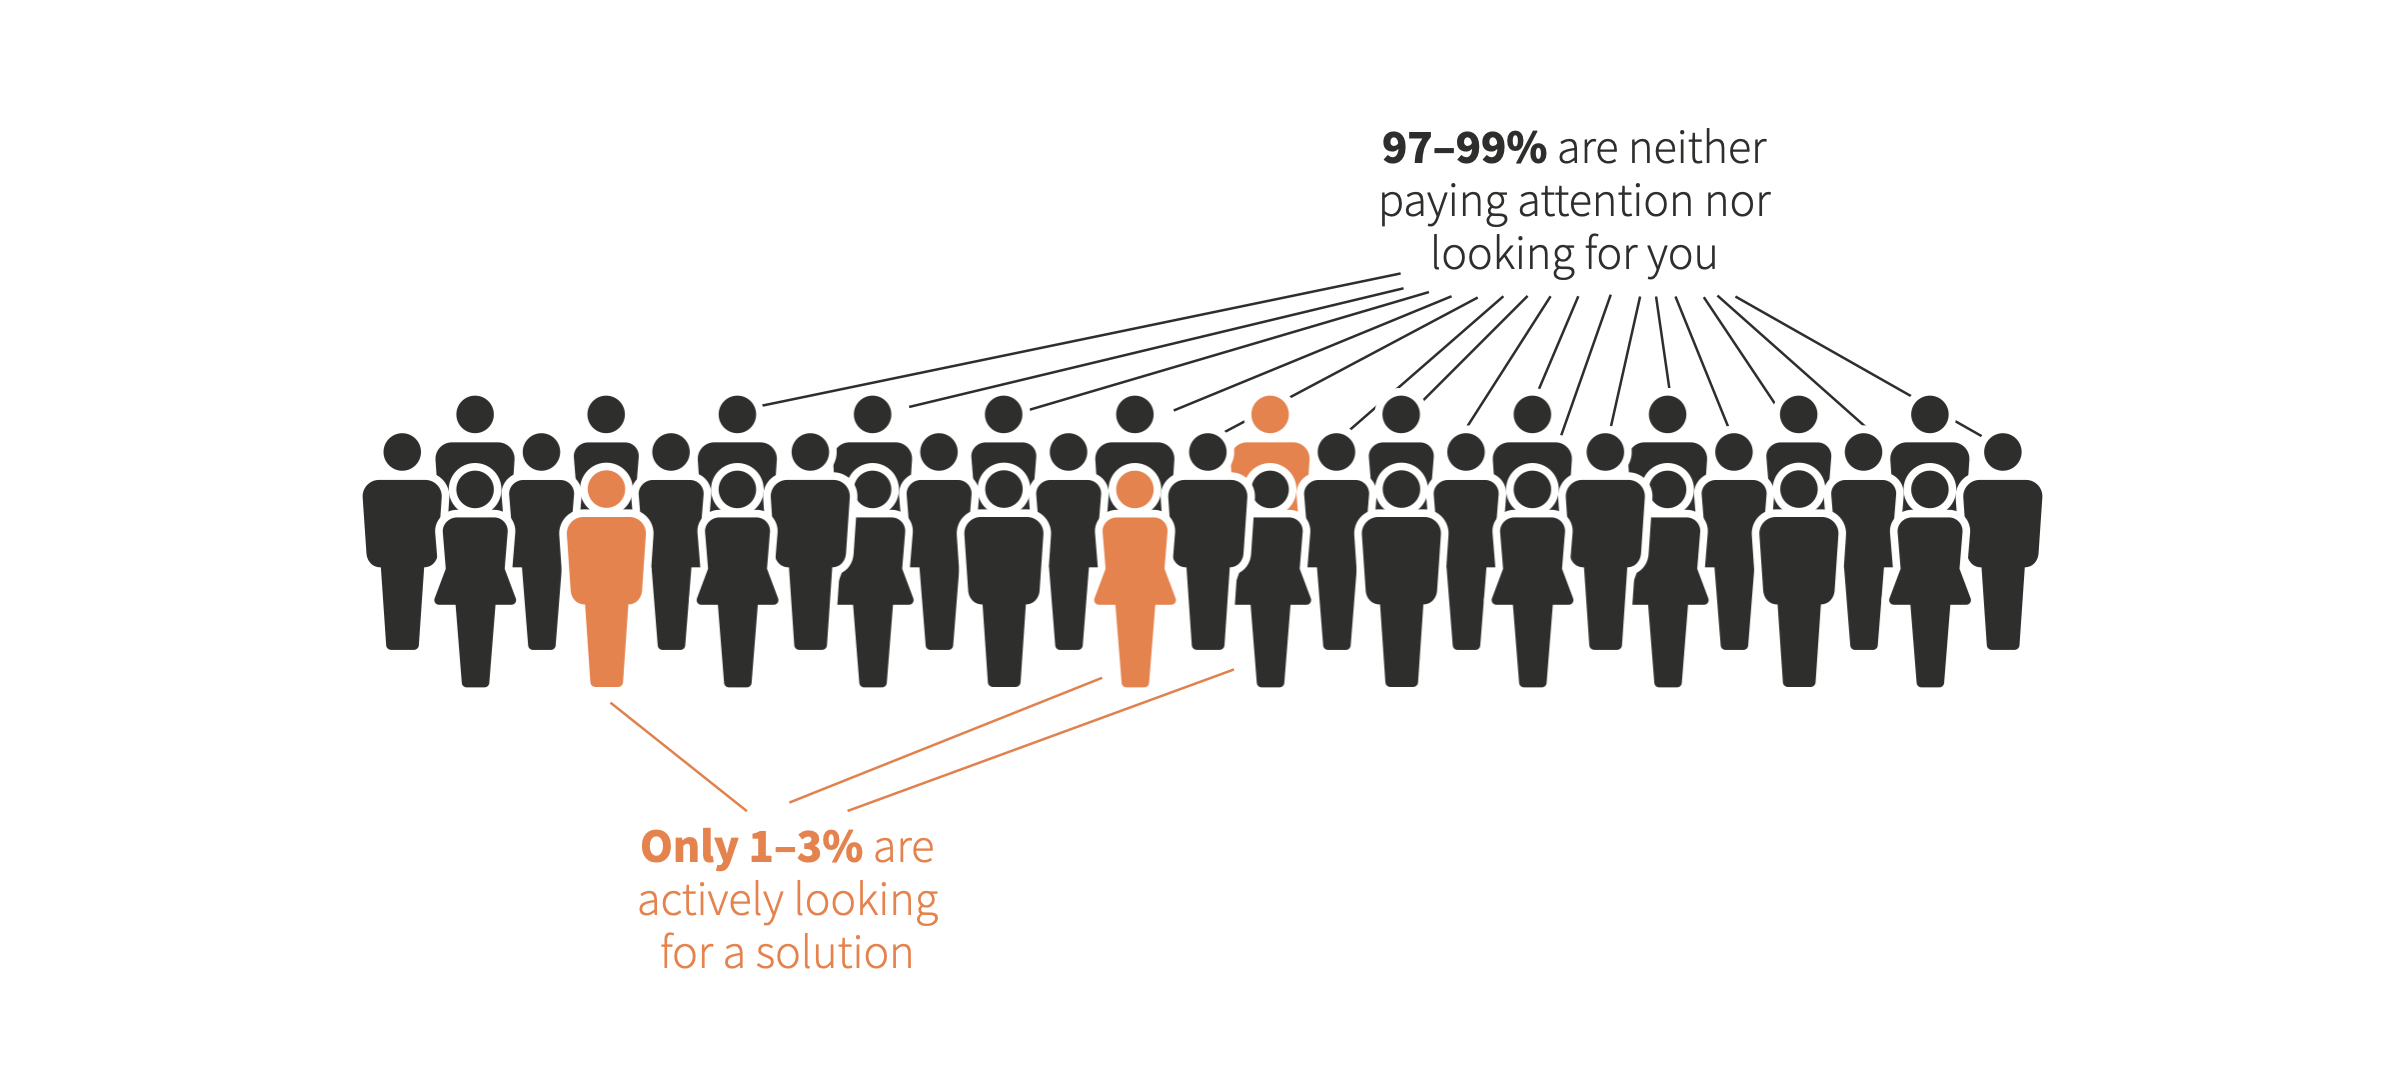 Several people icons in a group, 3 of then are highlighted in orange with an arrow pointing to them and saying "only 1-3% are actively looking for a solution.